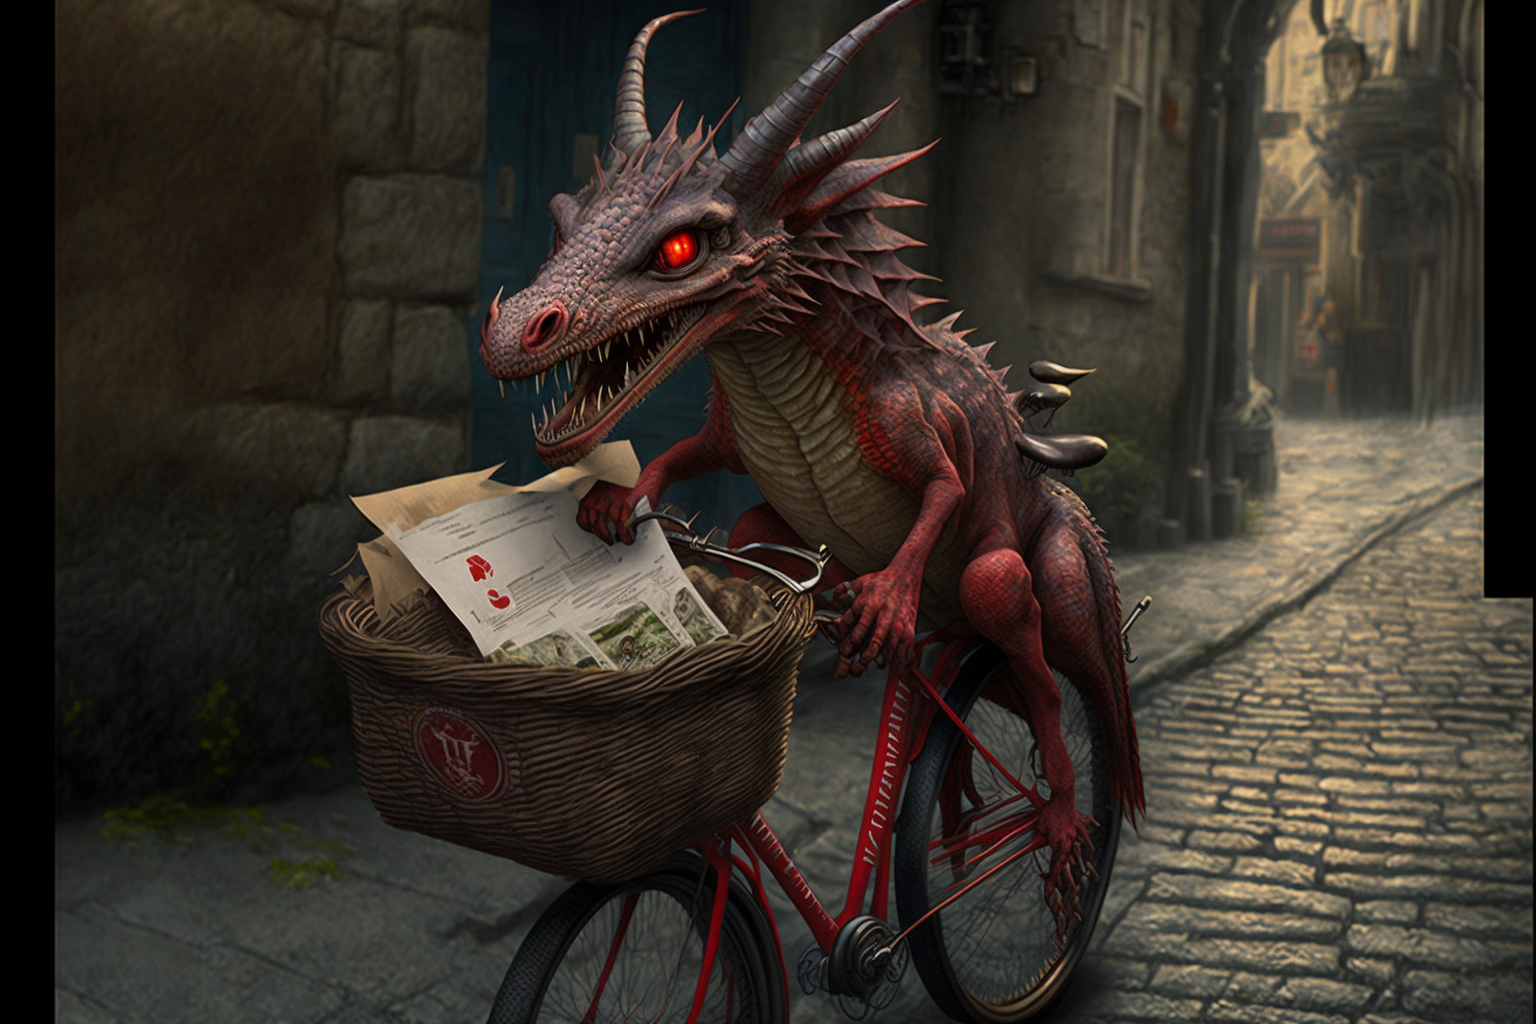 red dragon delivering a basket of newspapers on a bicycle